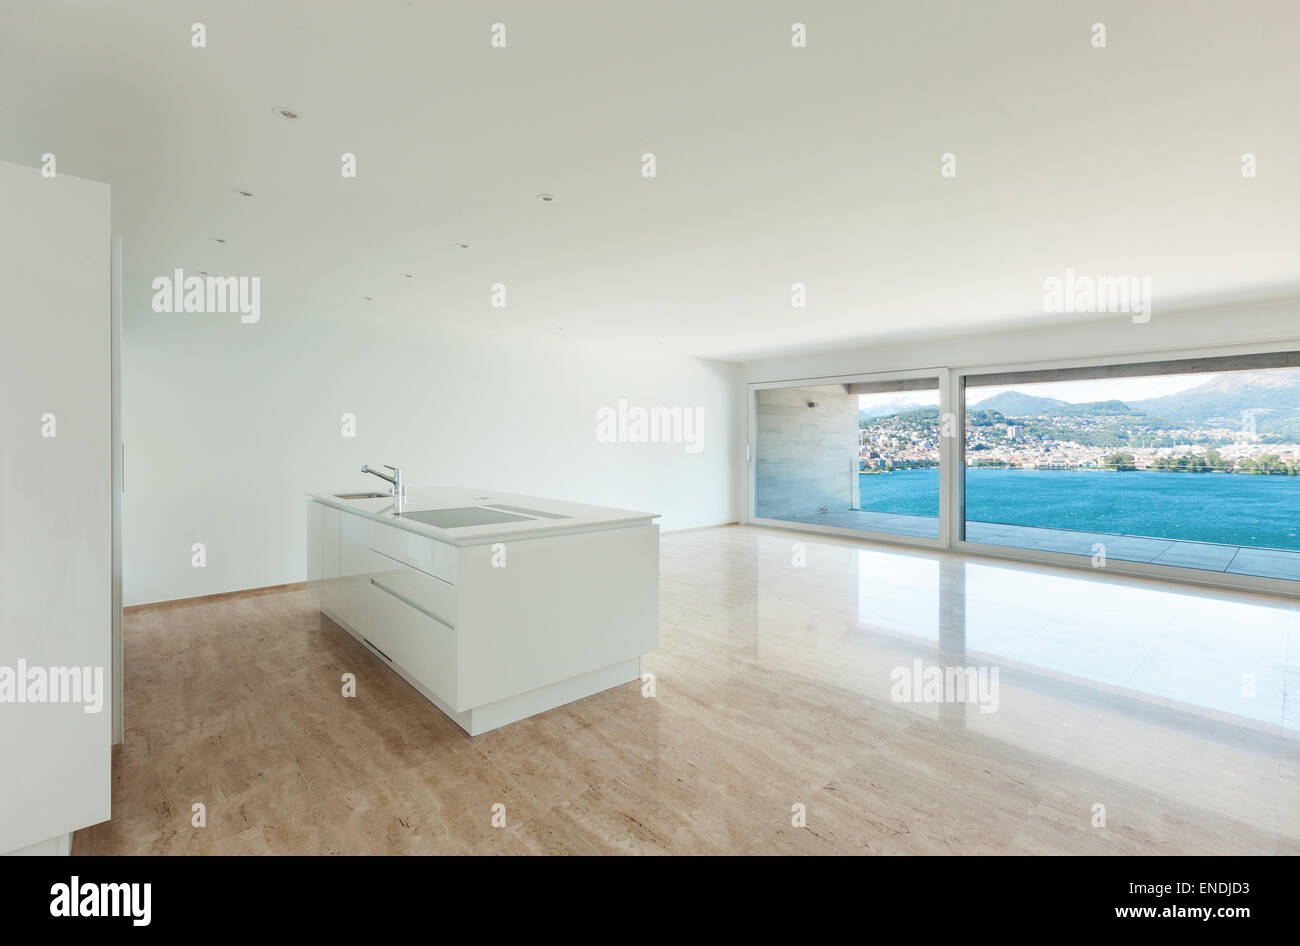 Interior, modern penthouse, empty living room with large windows Stock Photo